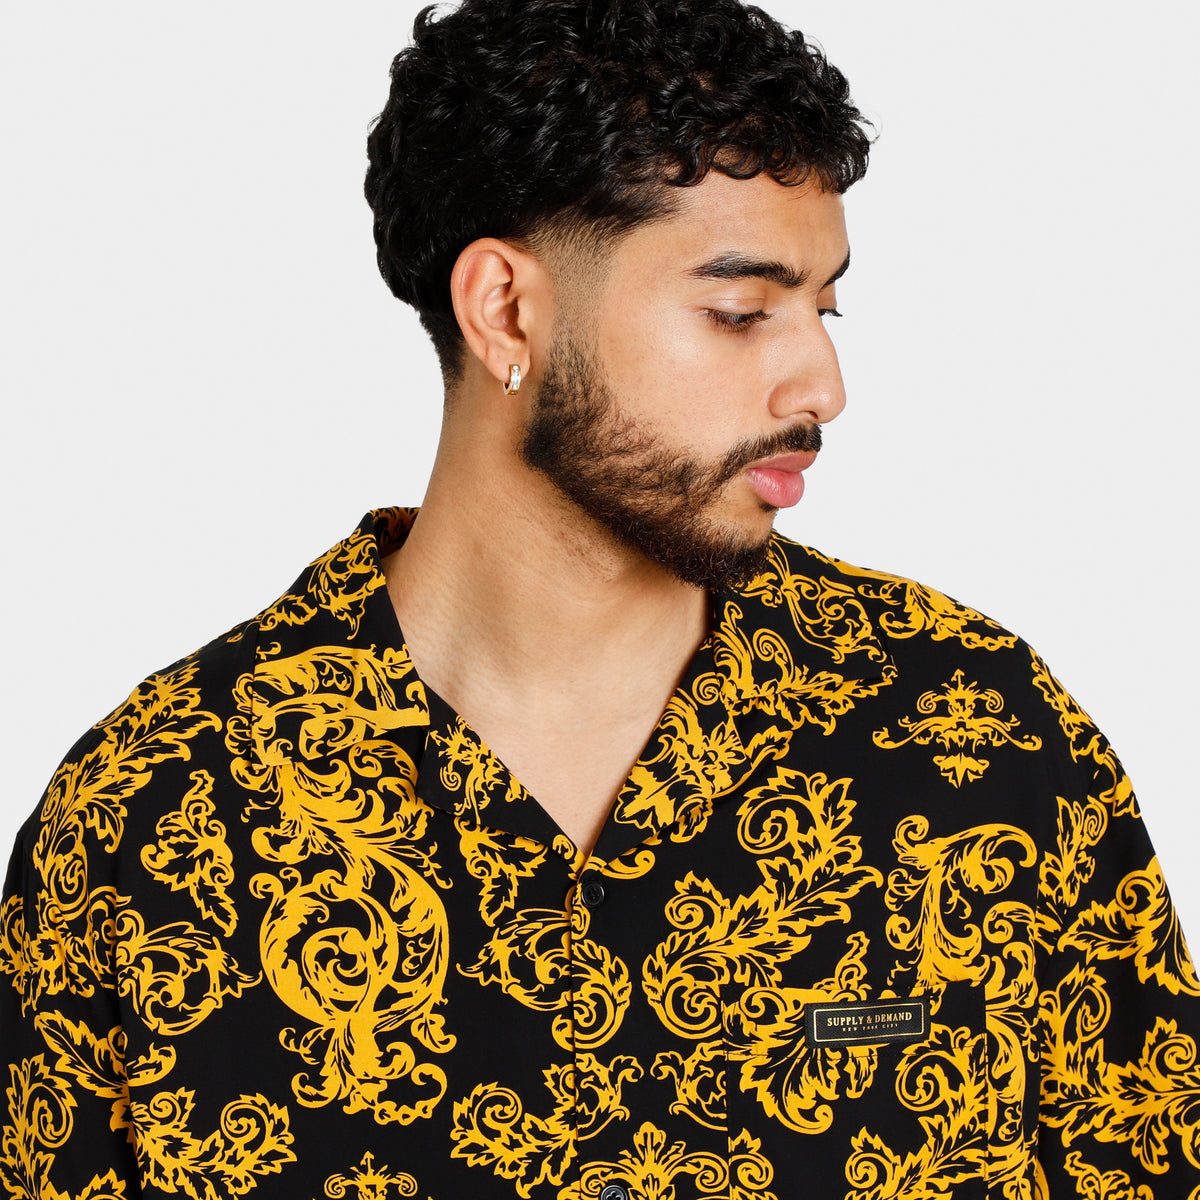 Supply and Demand Men's London Chain Riviera Button Up Camp Shirt in Black/Yellow/Black Size Large